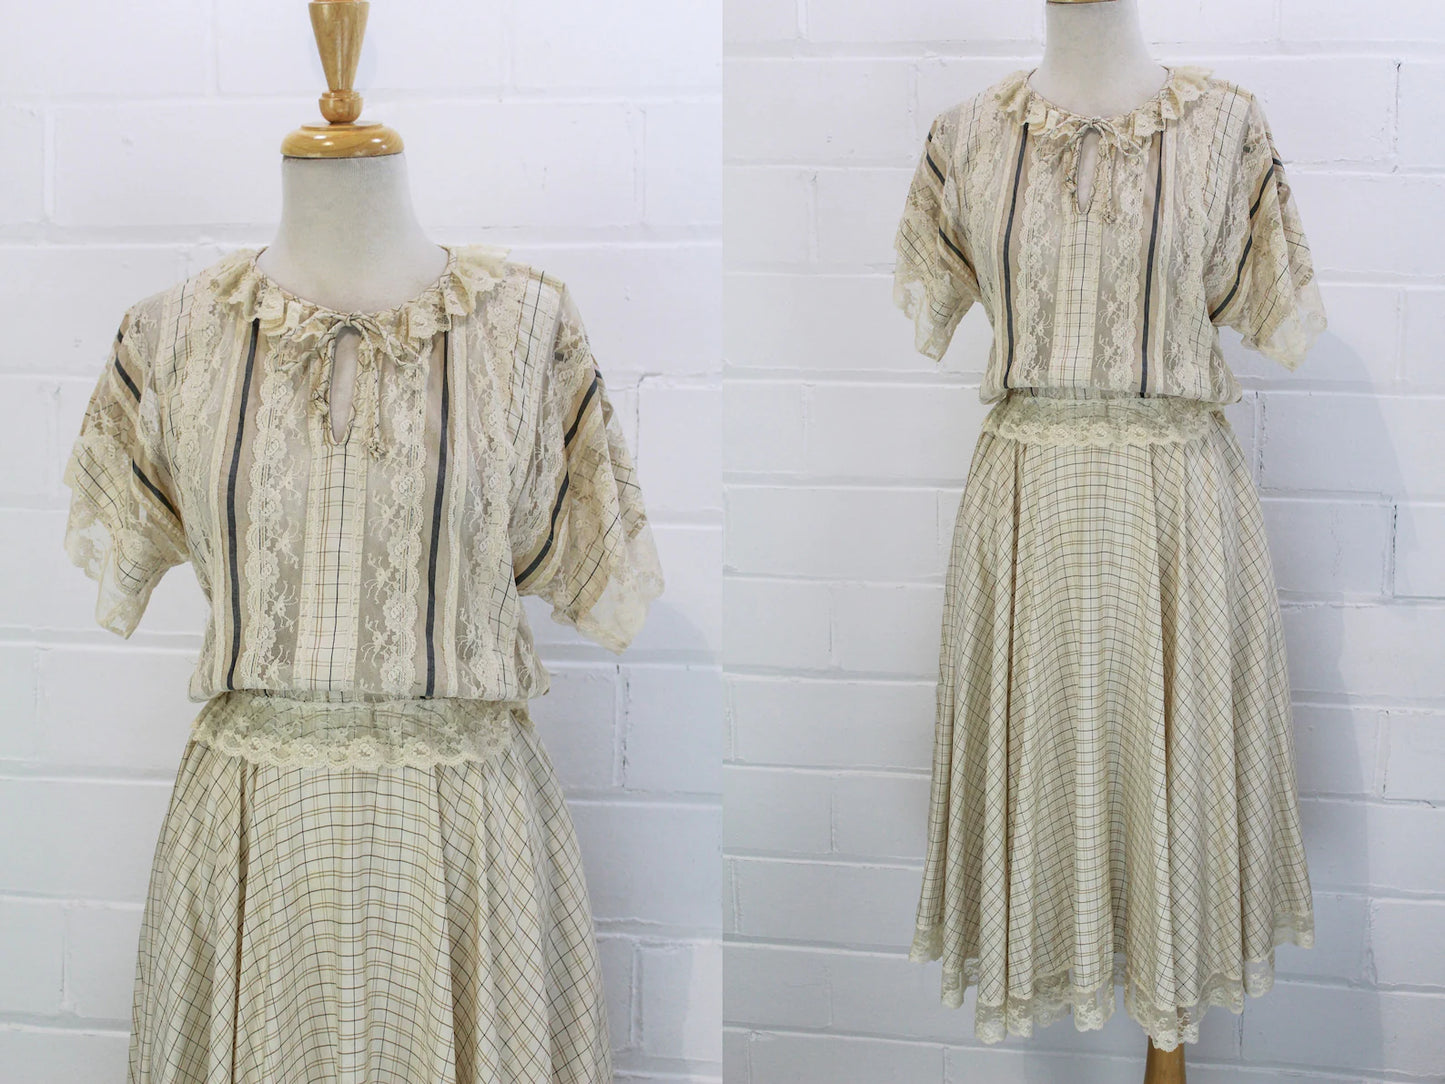 Vintage 1970s Koos Van den Akker Silk and Lace Dress with Window Pane Print, Ruffle Detail, Size Small, Bust 34"